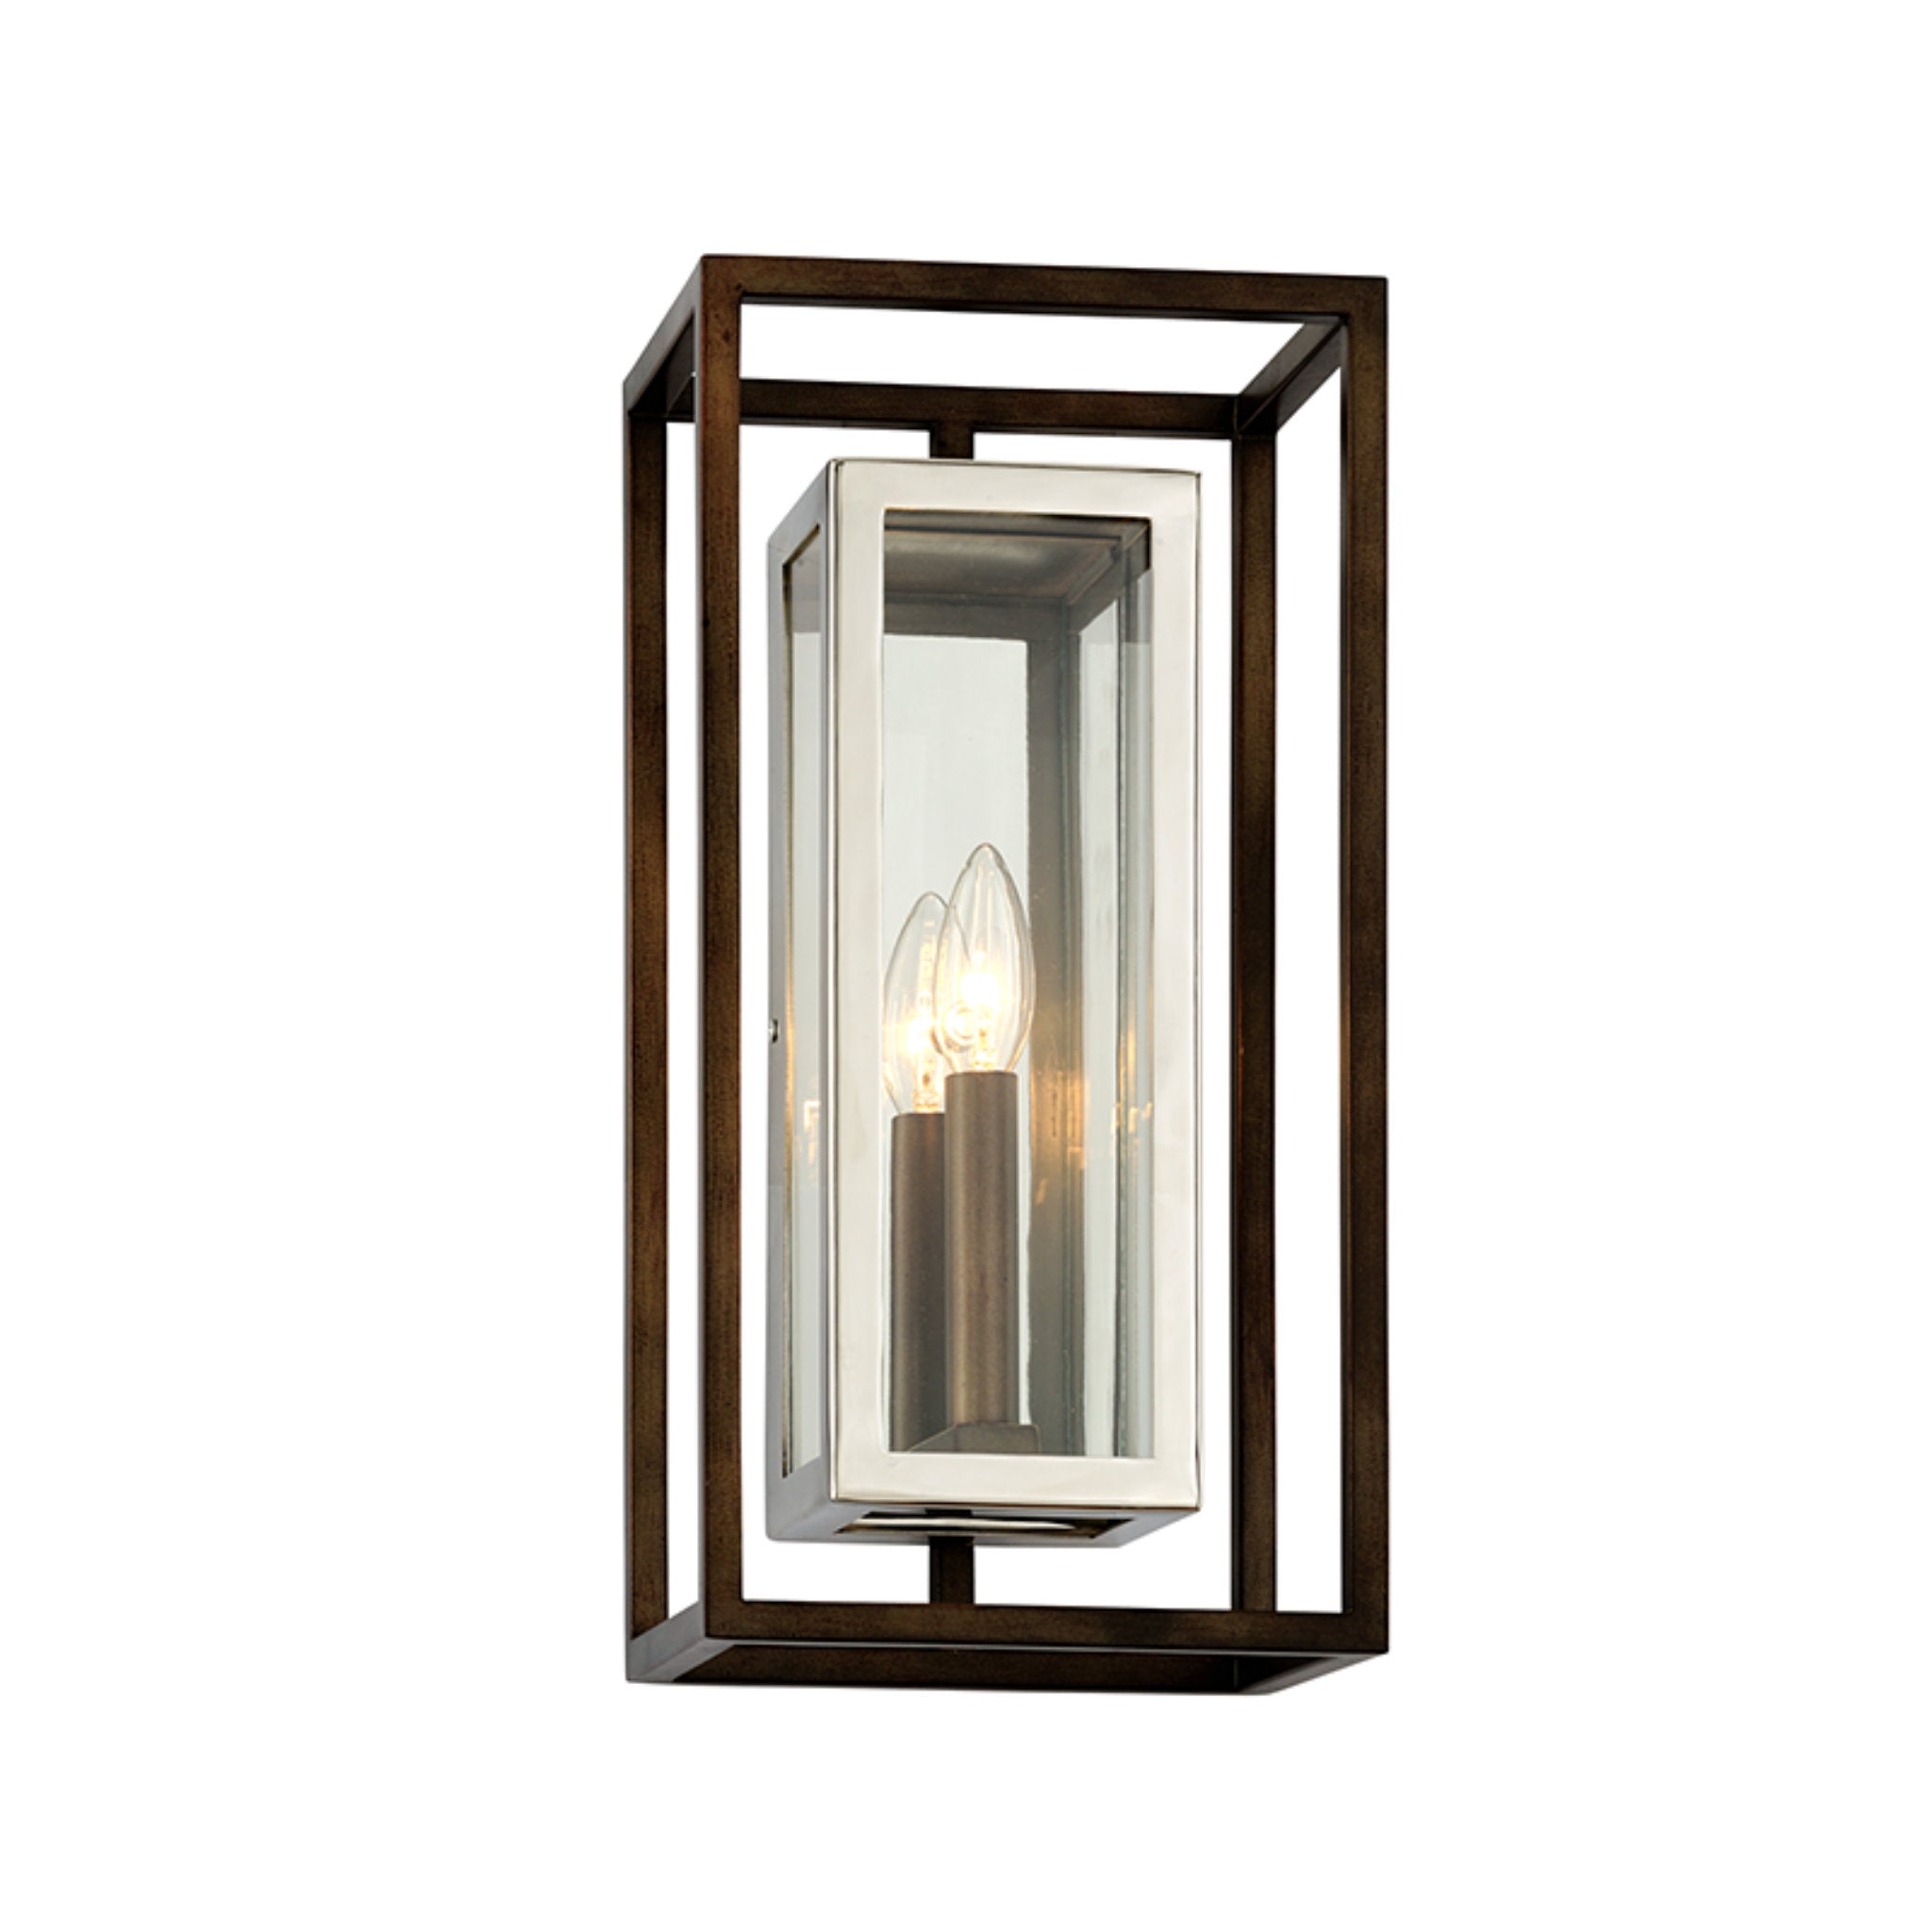 Morgan 1 Light Wall Sconce in Bronze With Polished Stainless